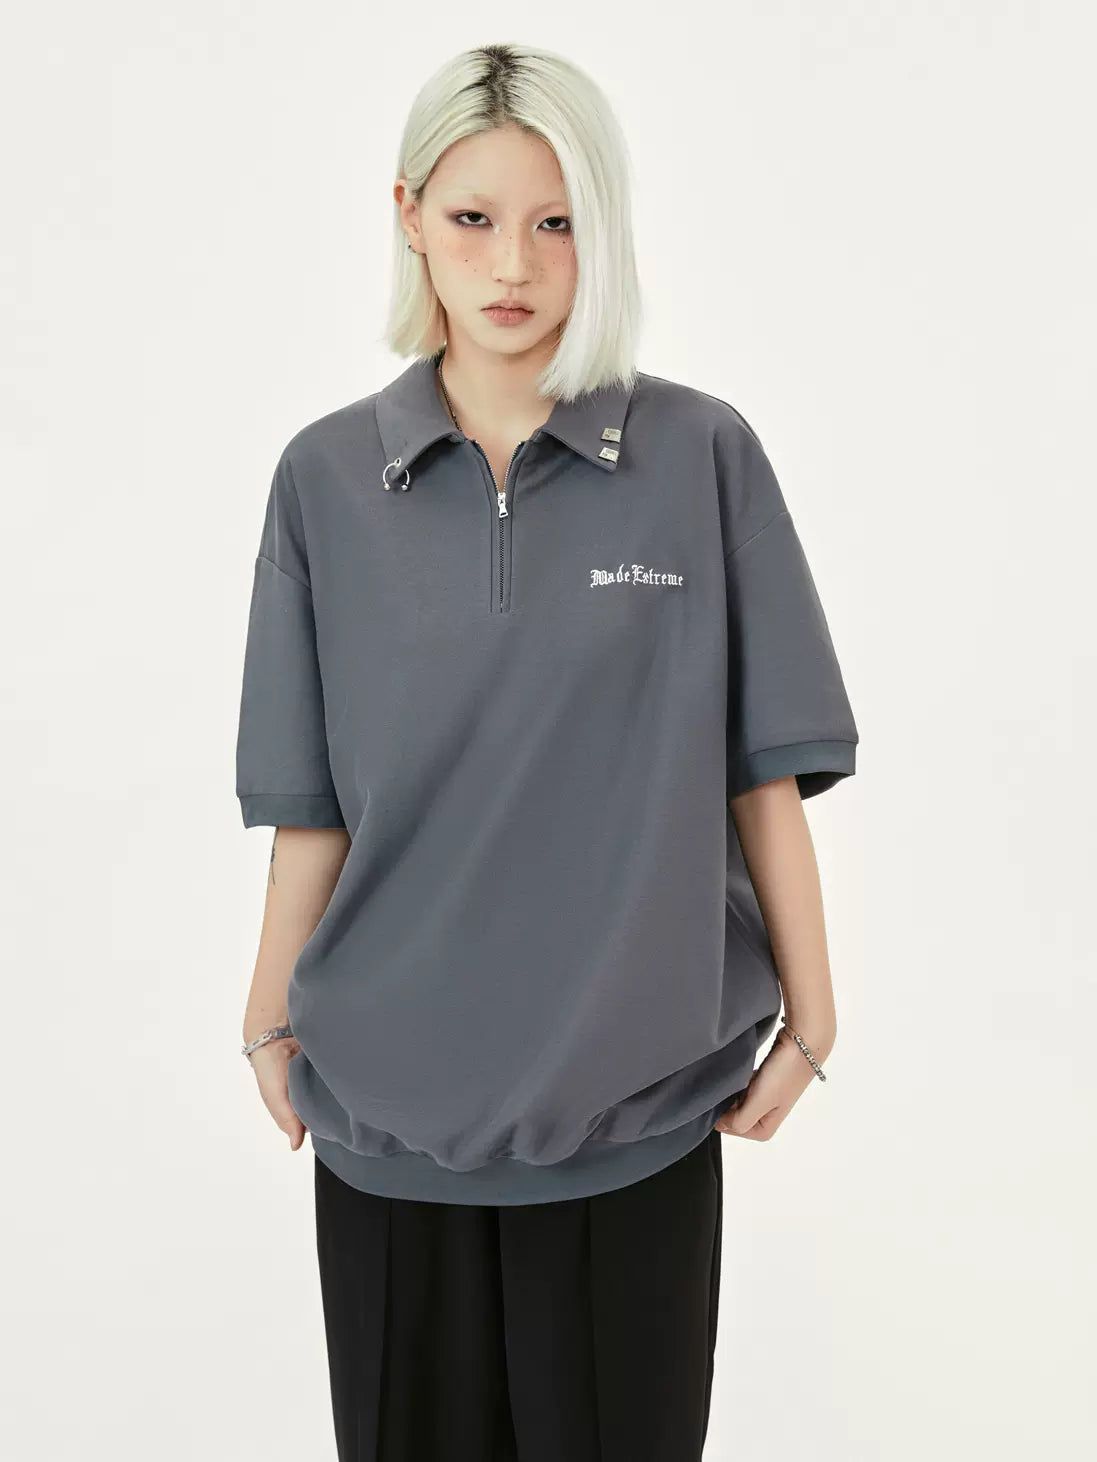 Metal Accessory Collar Zipped Polo Korean Street Fashion Polo By Made Extreme Shop Online at OH Vault